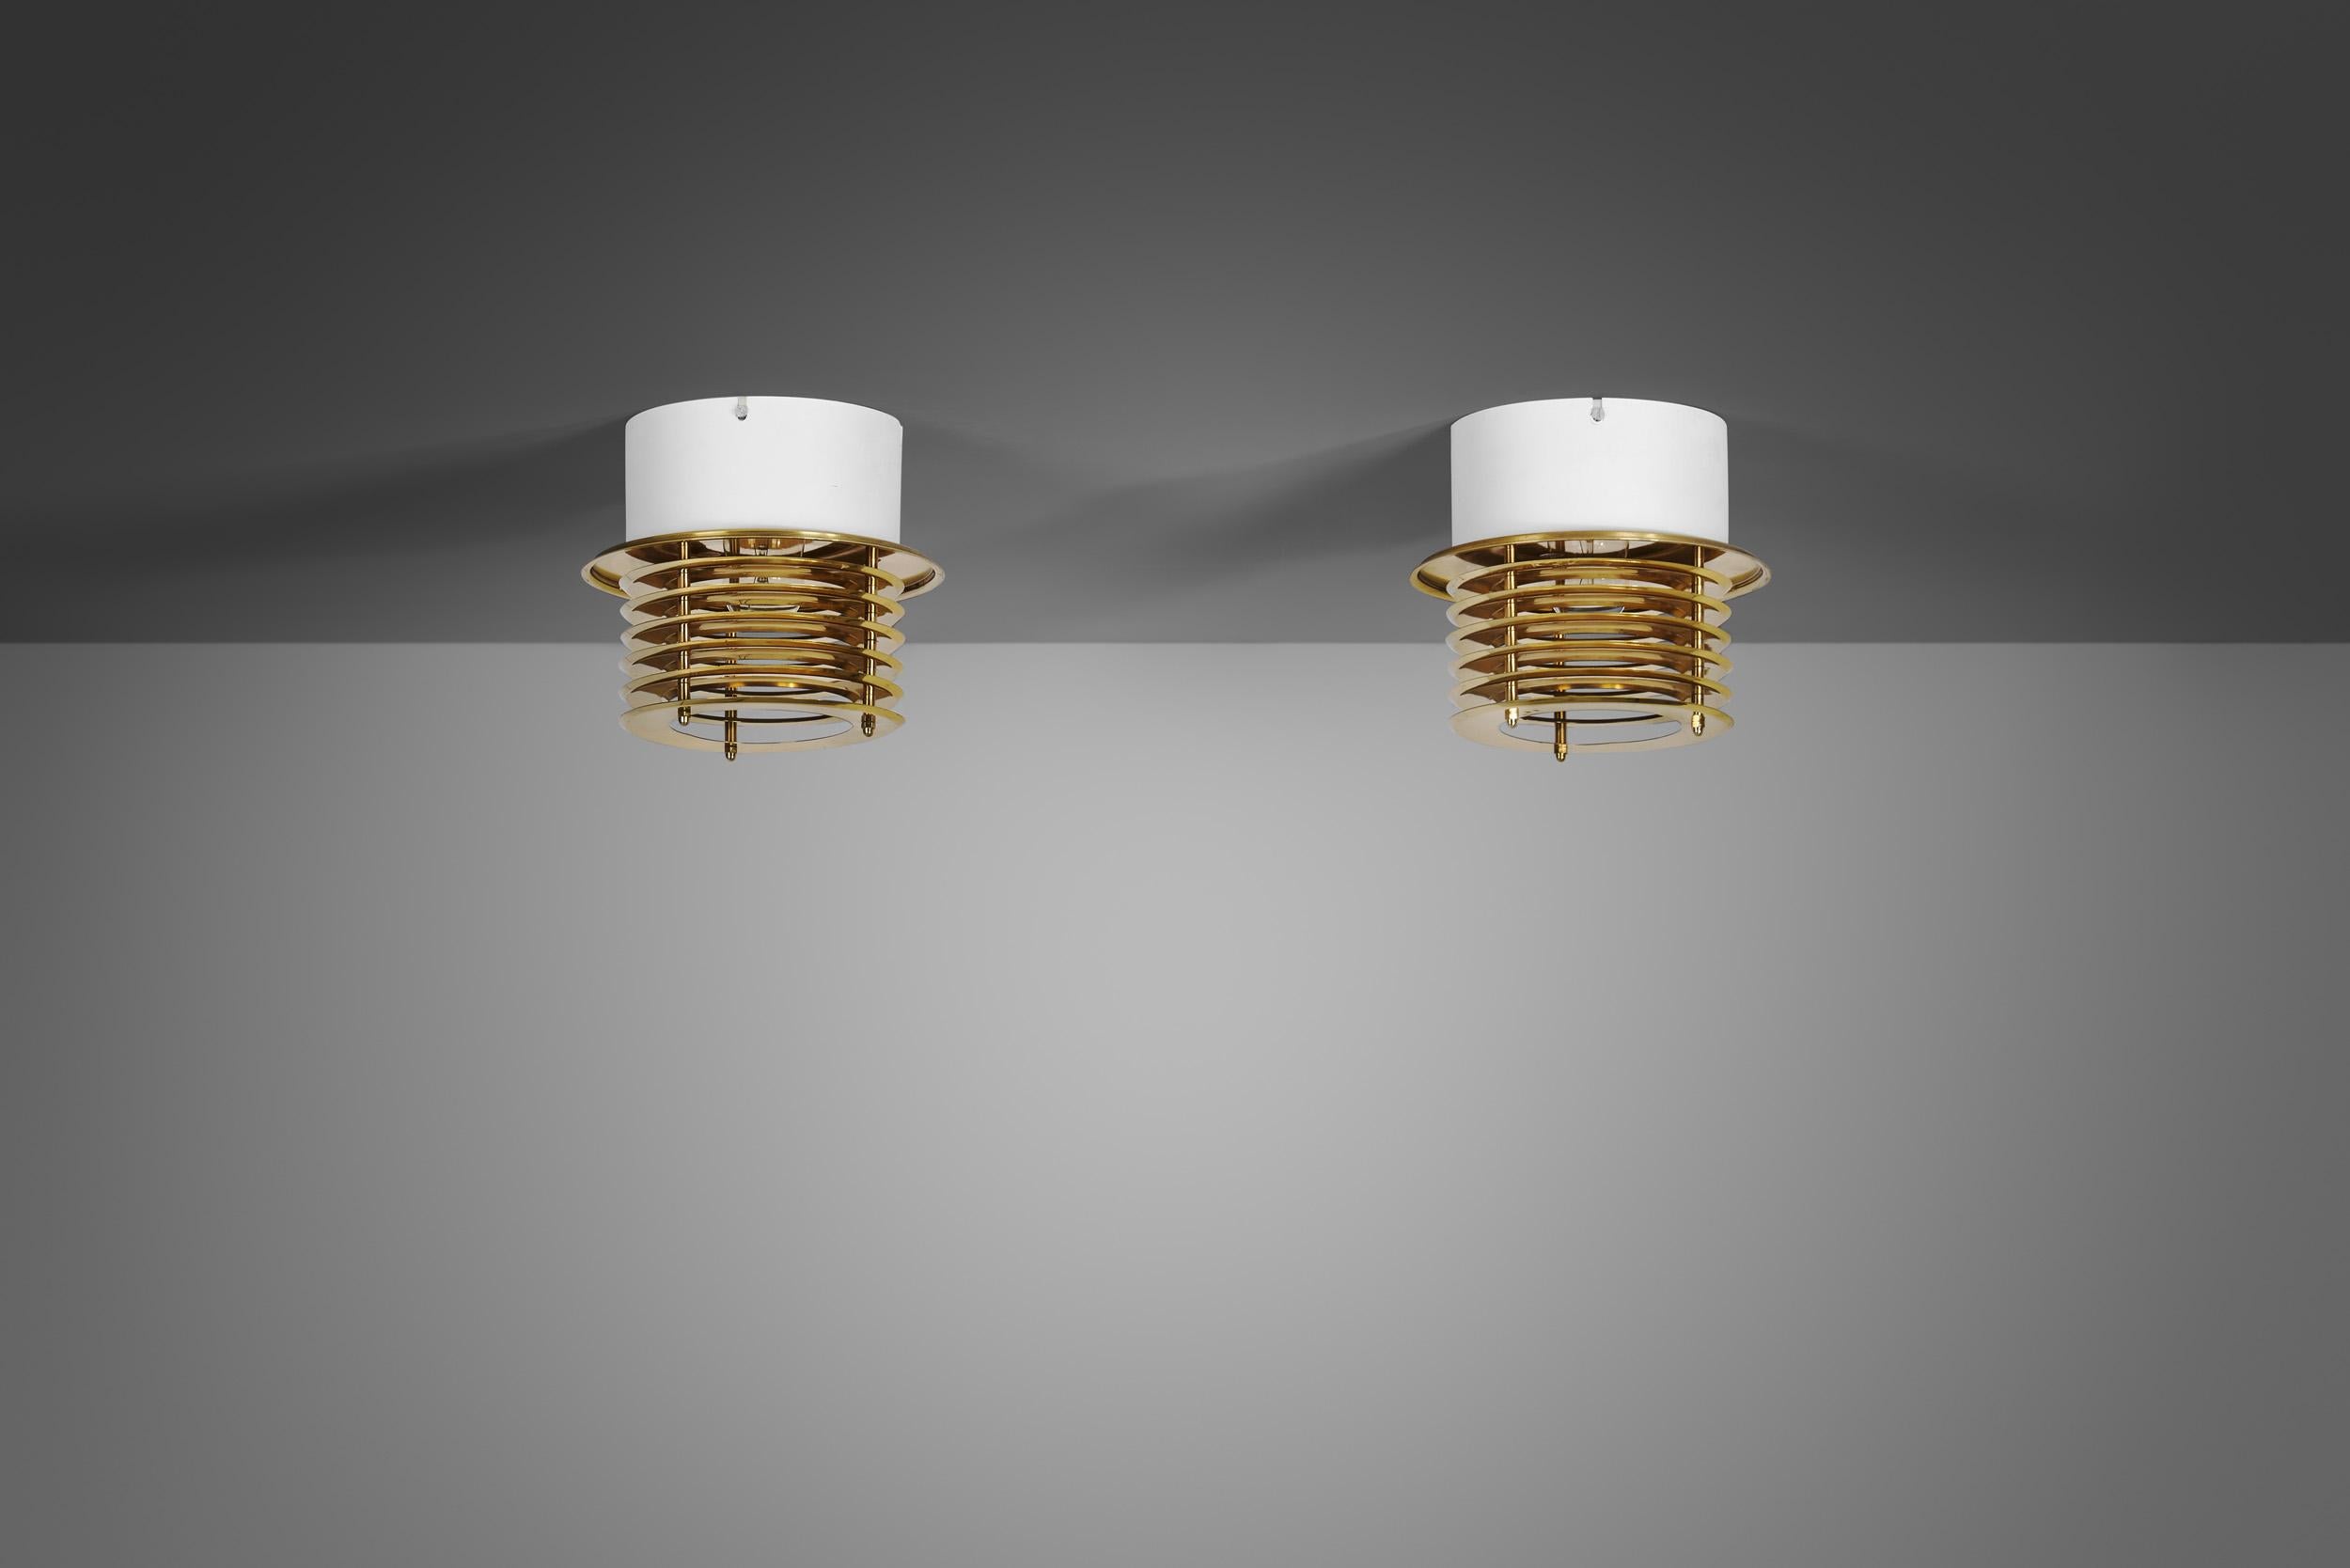 Lacquered Brass and Metal Ceiling Lamps by Taiba-Falkenberg Belysnin, Sweden 1960s For Sale